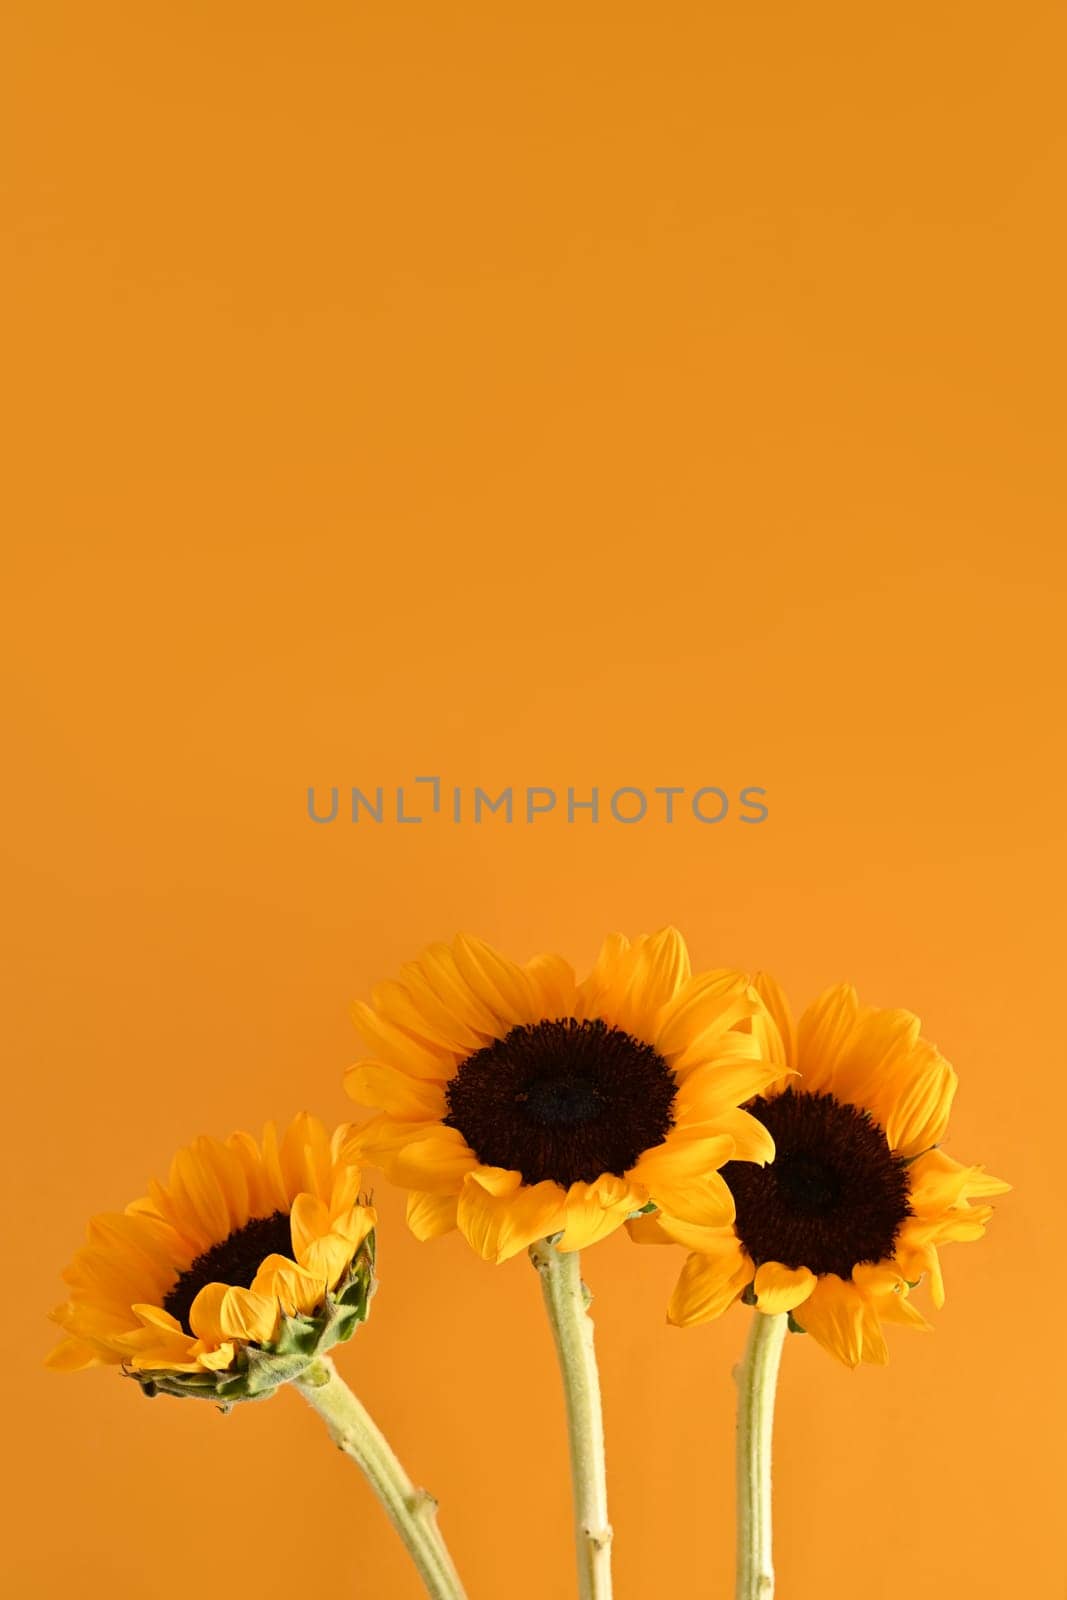 Bouquet of sunflowers on light yellow background with copy space for your text by prathanchorruangsak